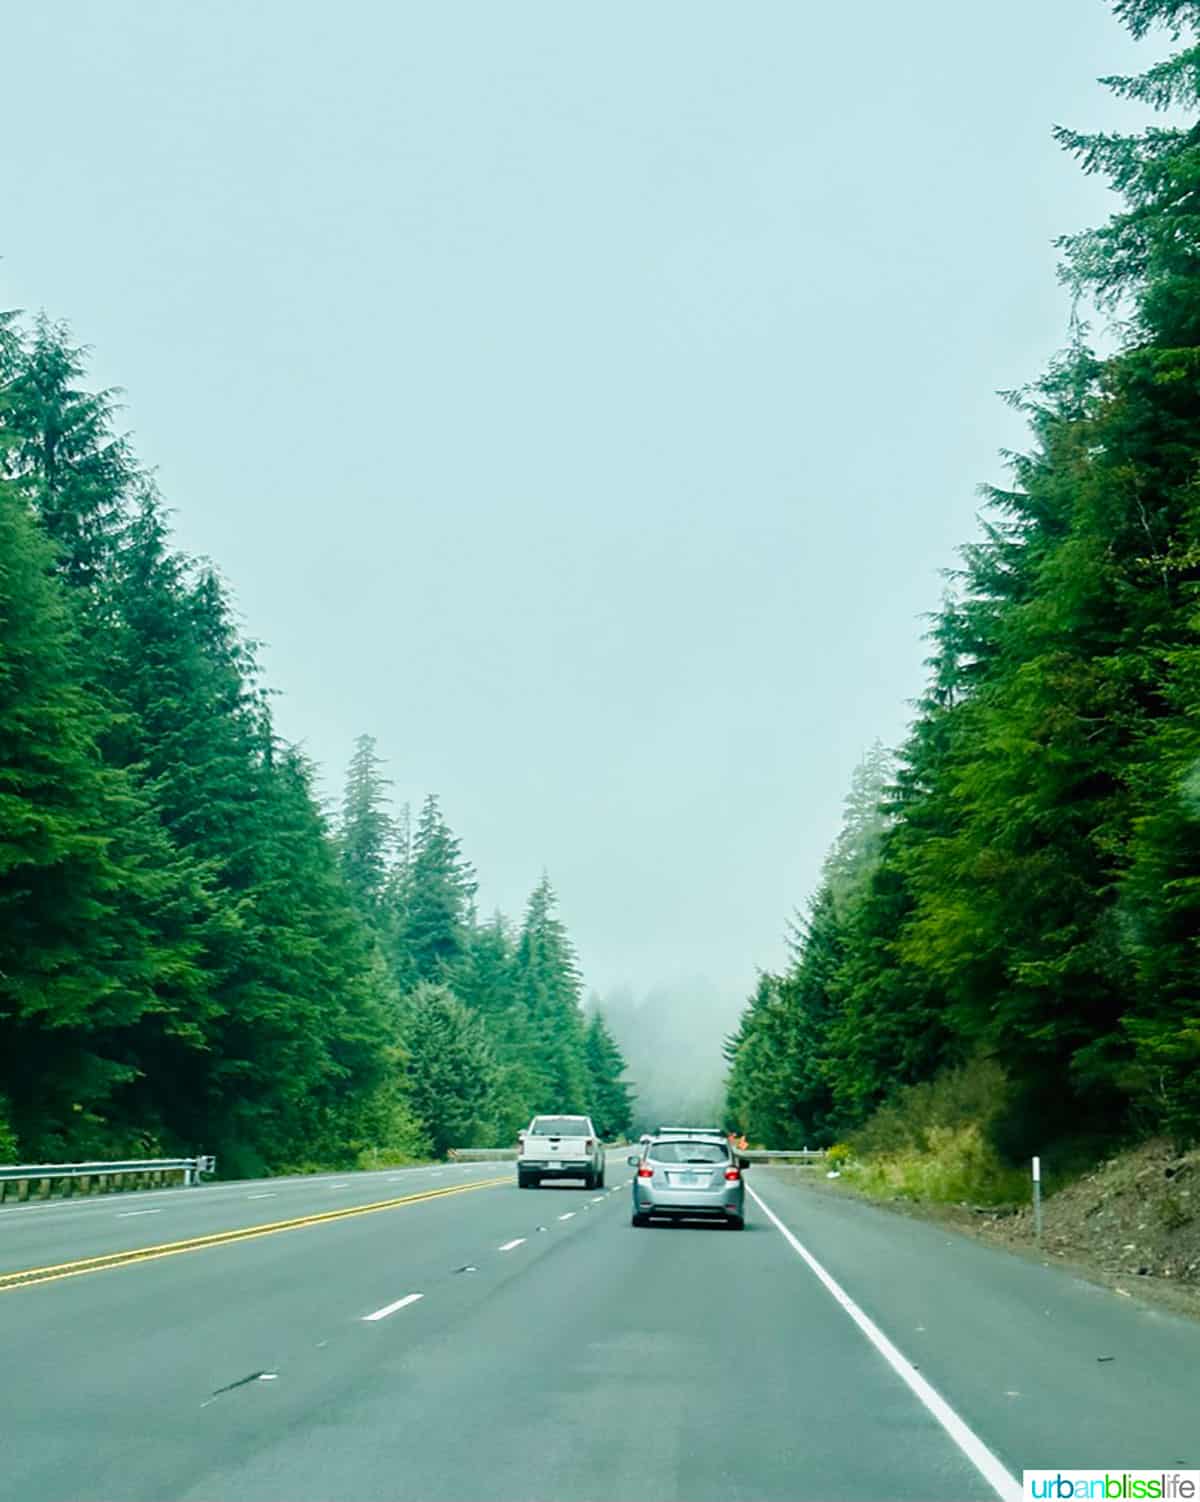 Foggy Oregon highway with trees with two cars on it.